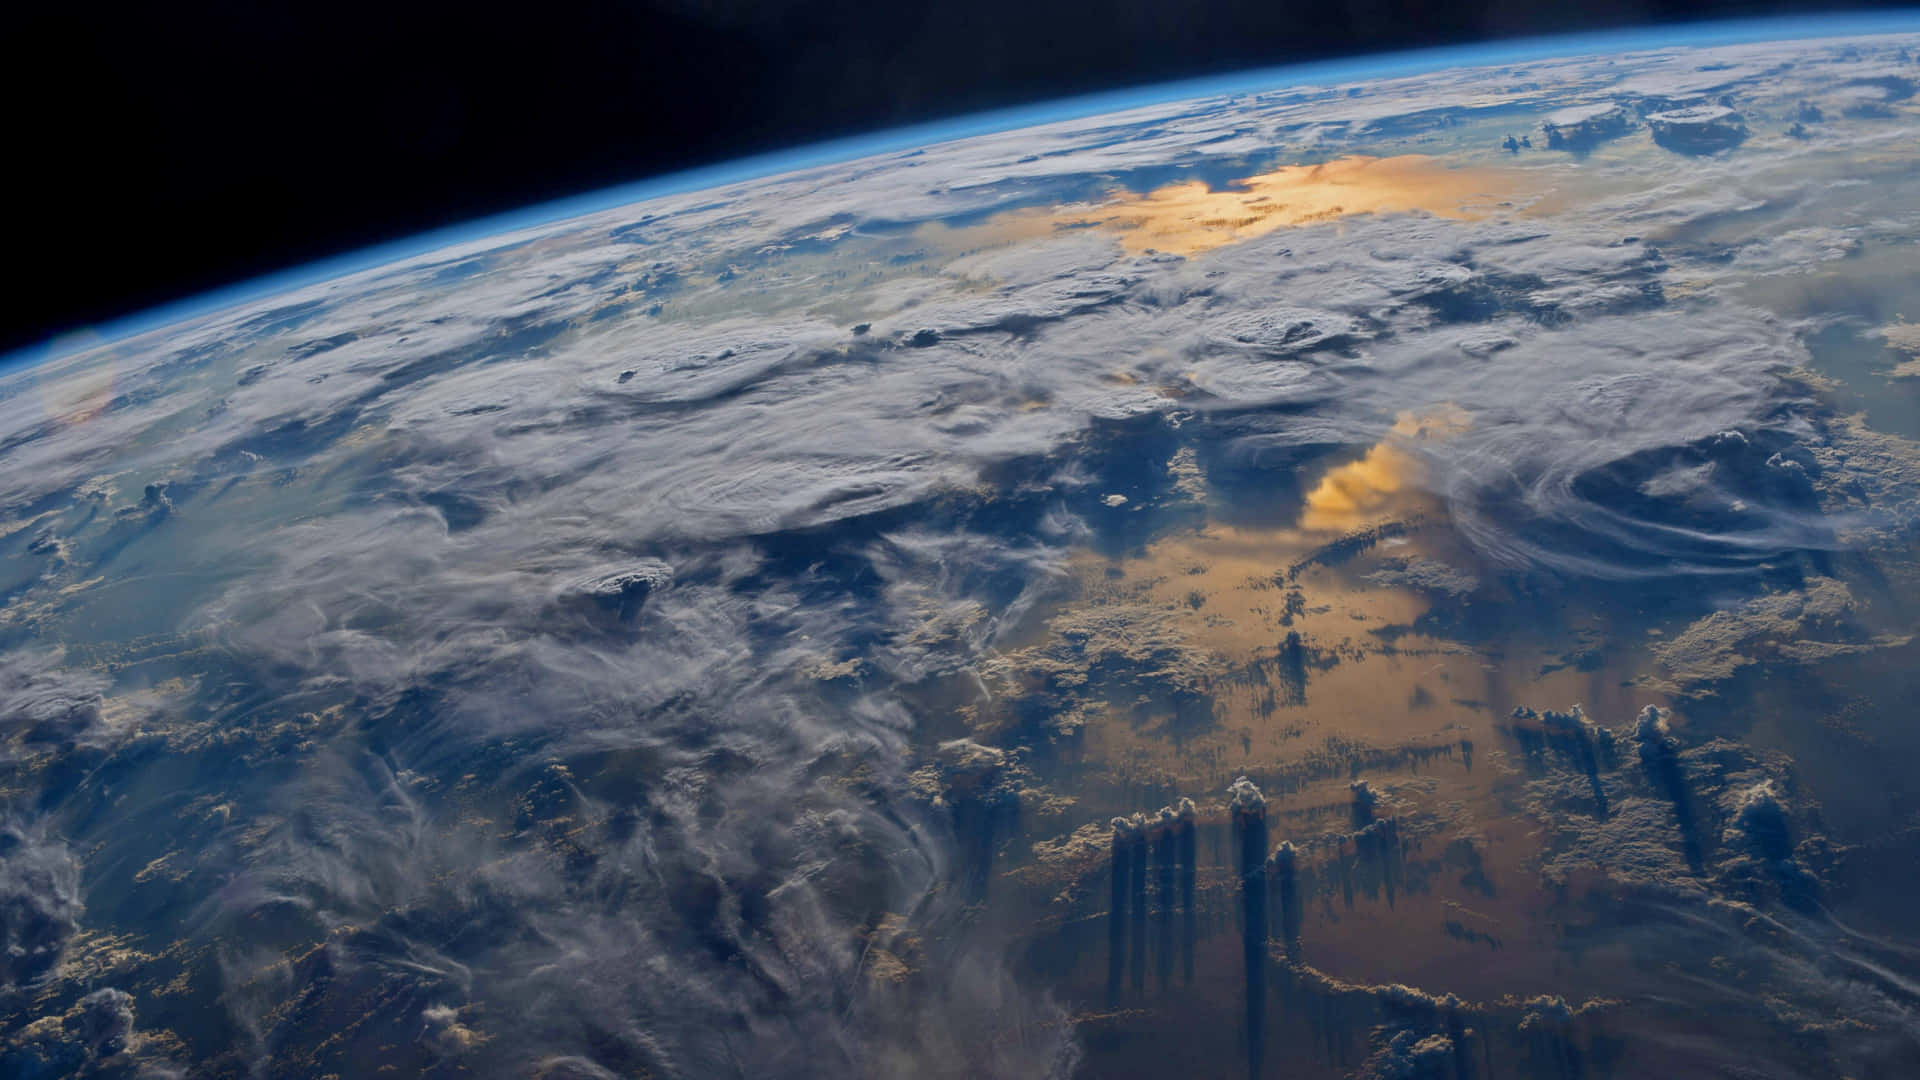 A breathtaking view of planet Earth from outer space. Wallpaper